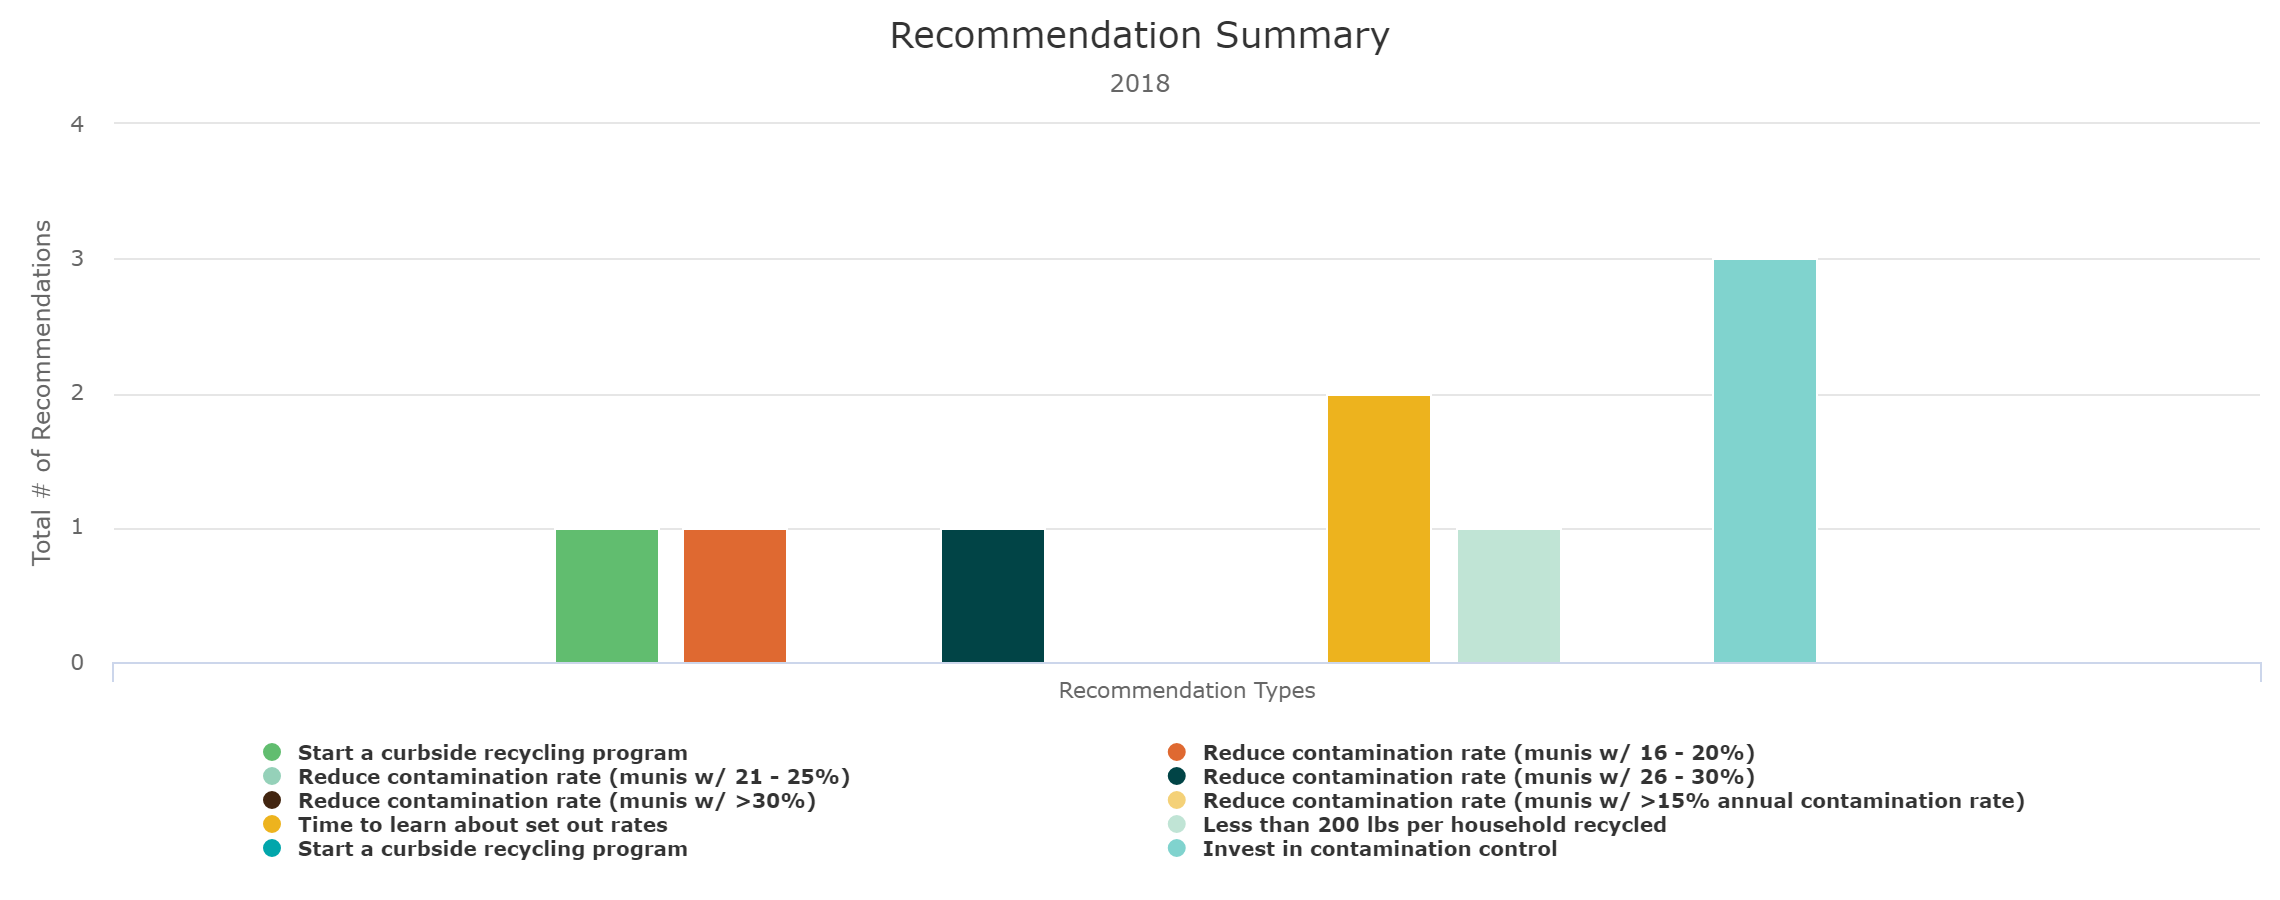 Recommendations Summary